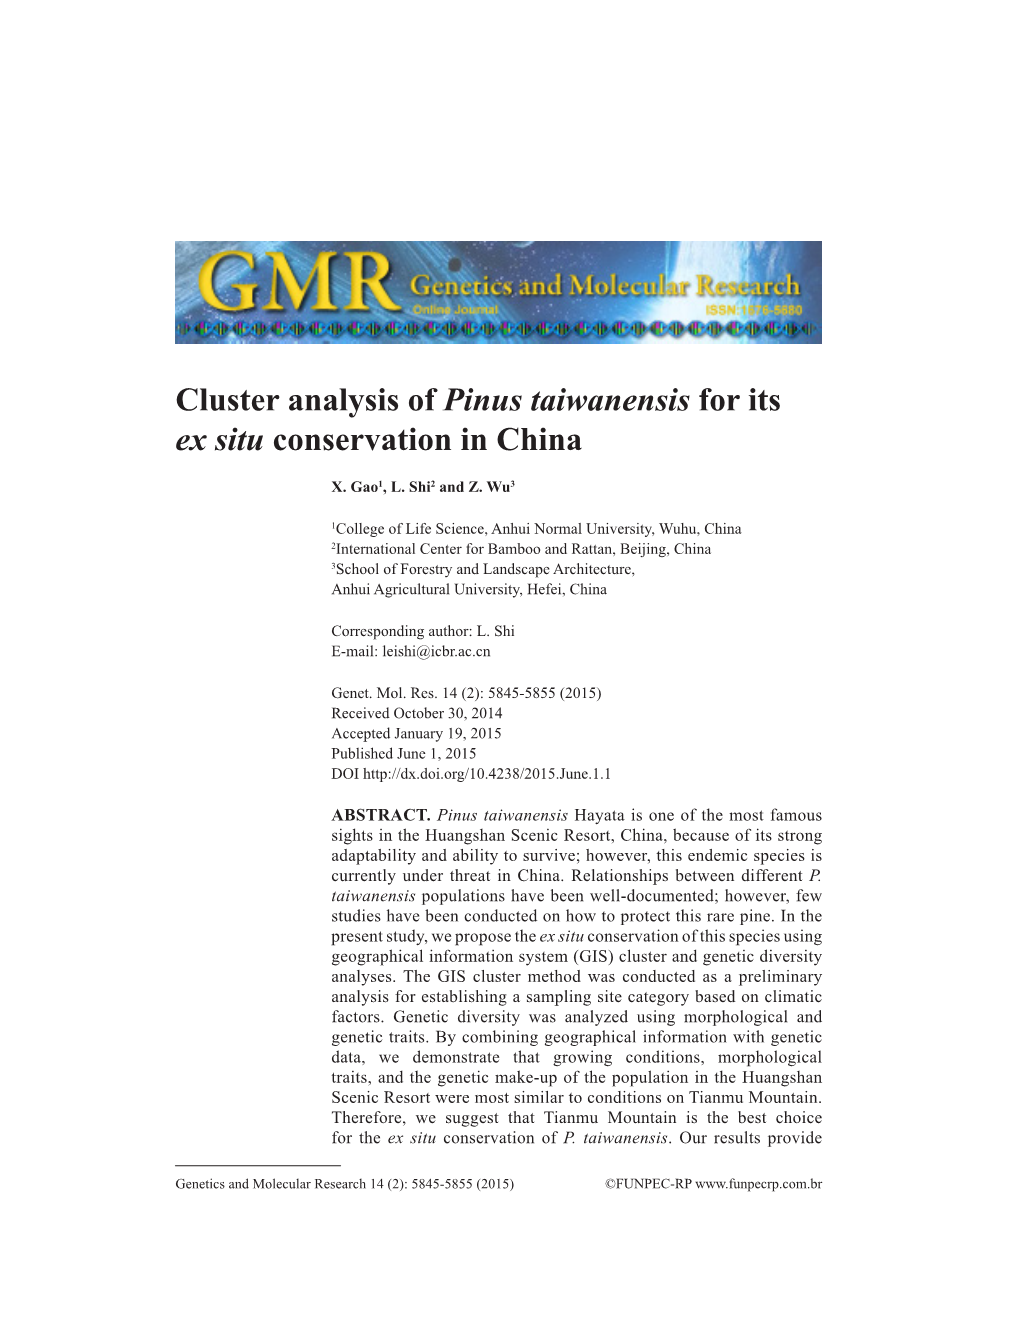 Cluster Analysis of Pinus Taiwanensis for Its Ex Situ Conservation in China